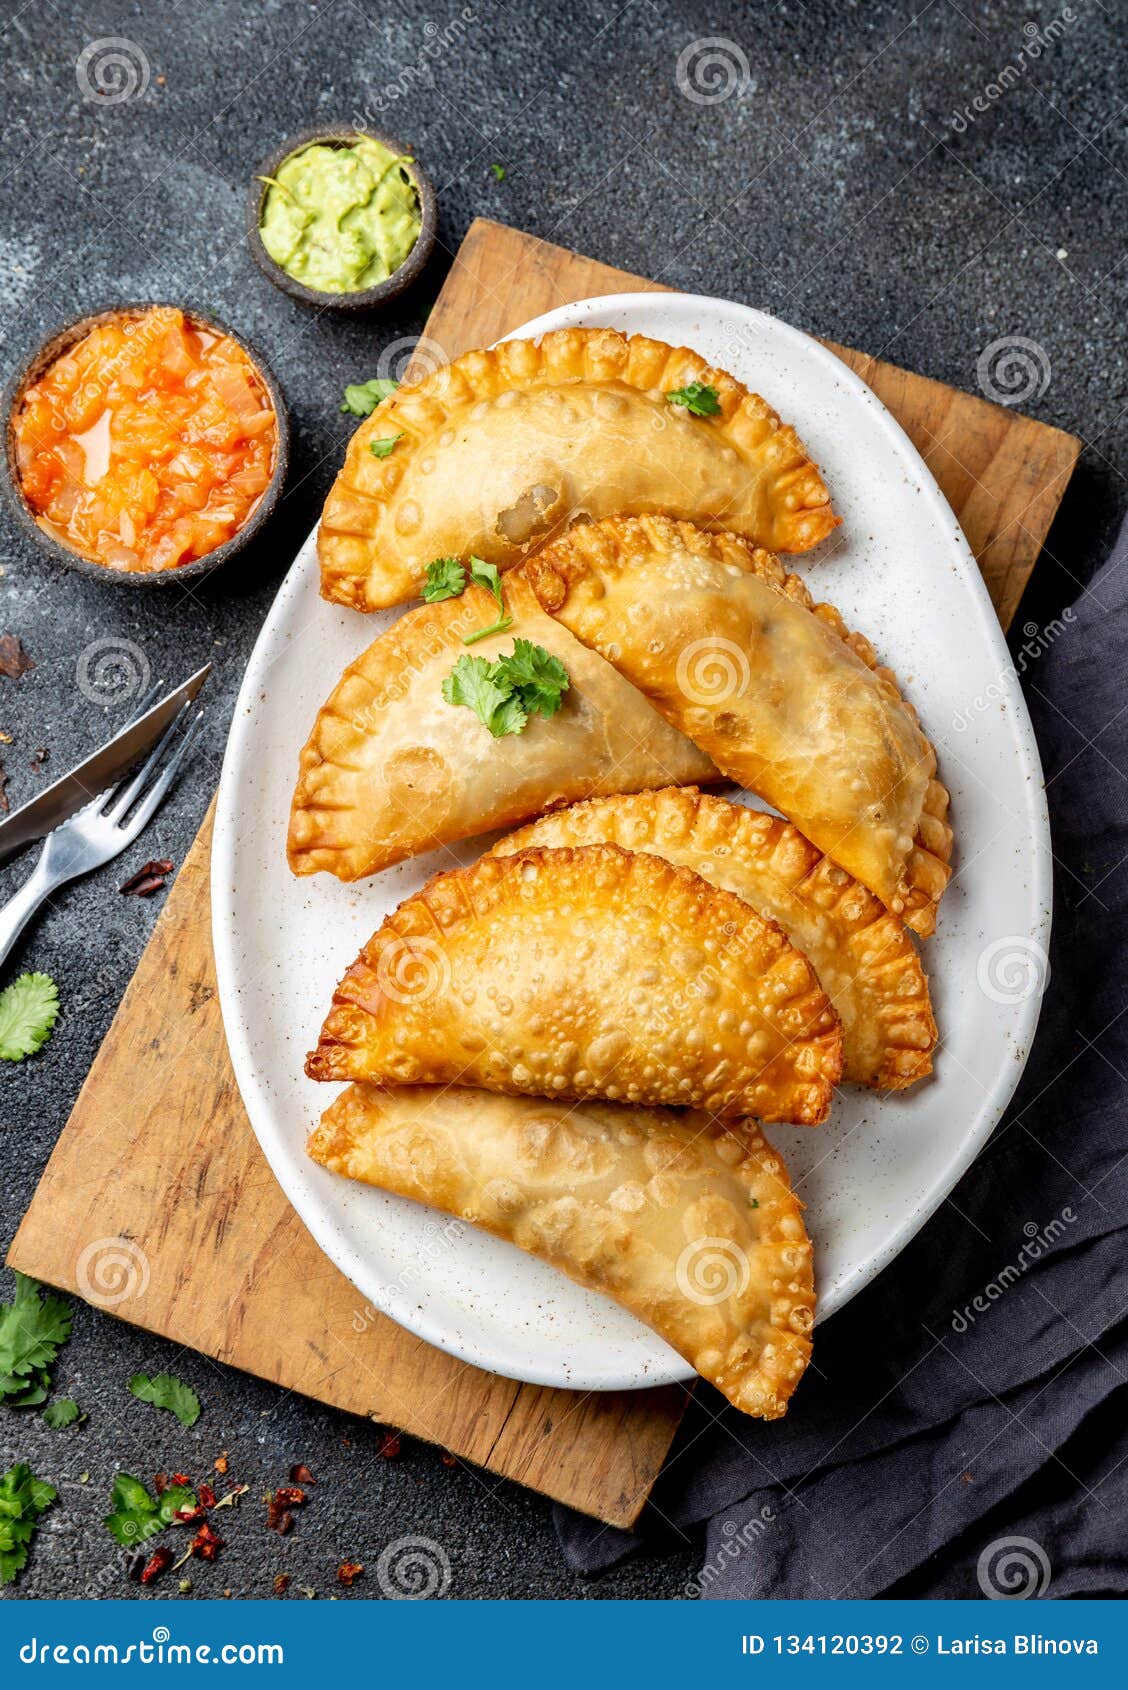 latin american fried empanadas with tomato and avocado sauces. top view